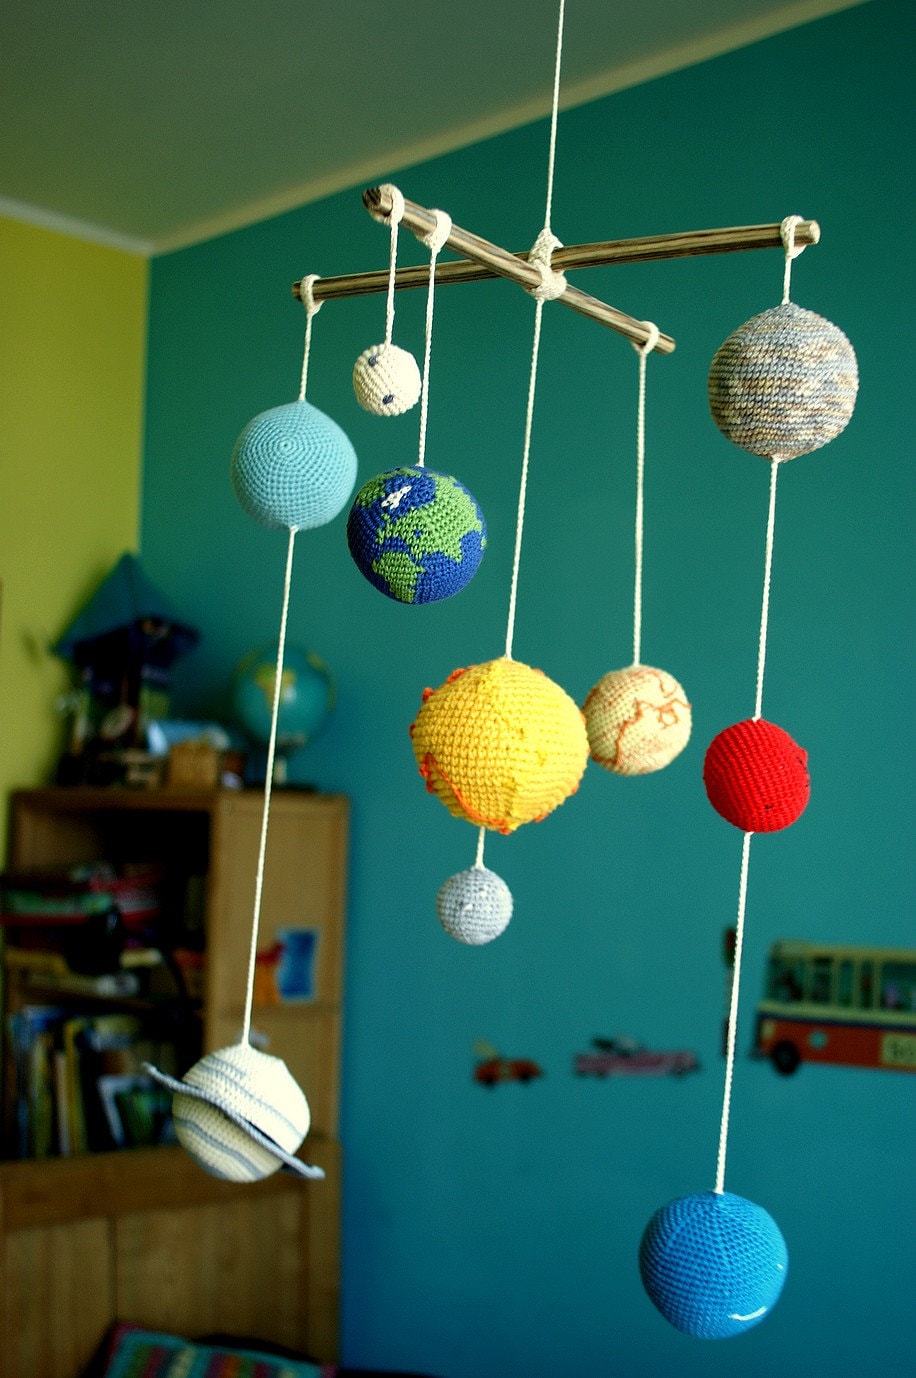 Solar System Planets Mobile Crochet Baby Mobile